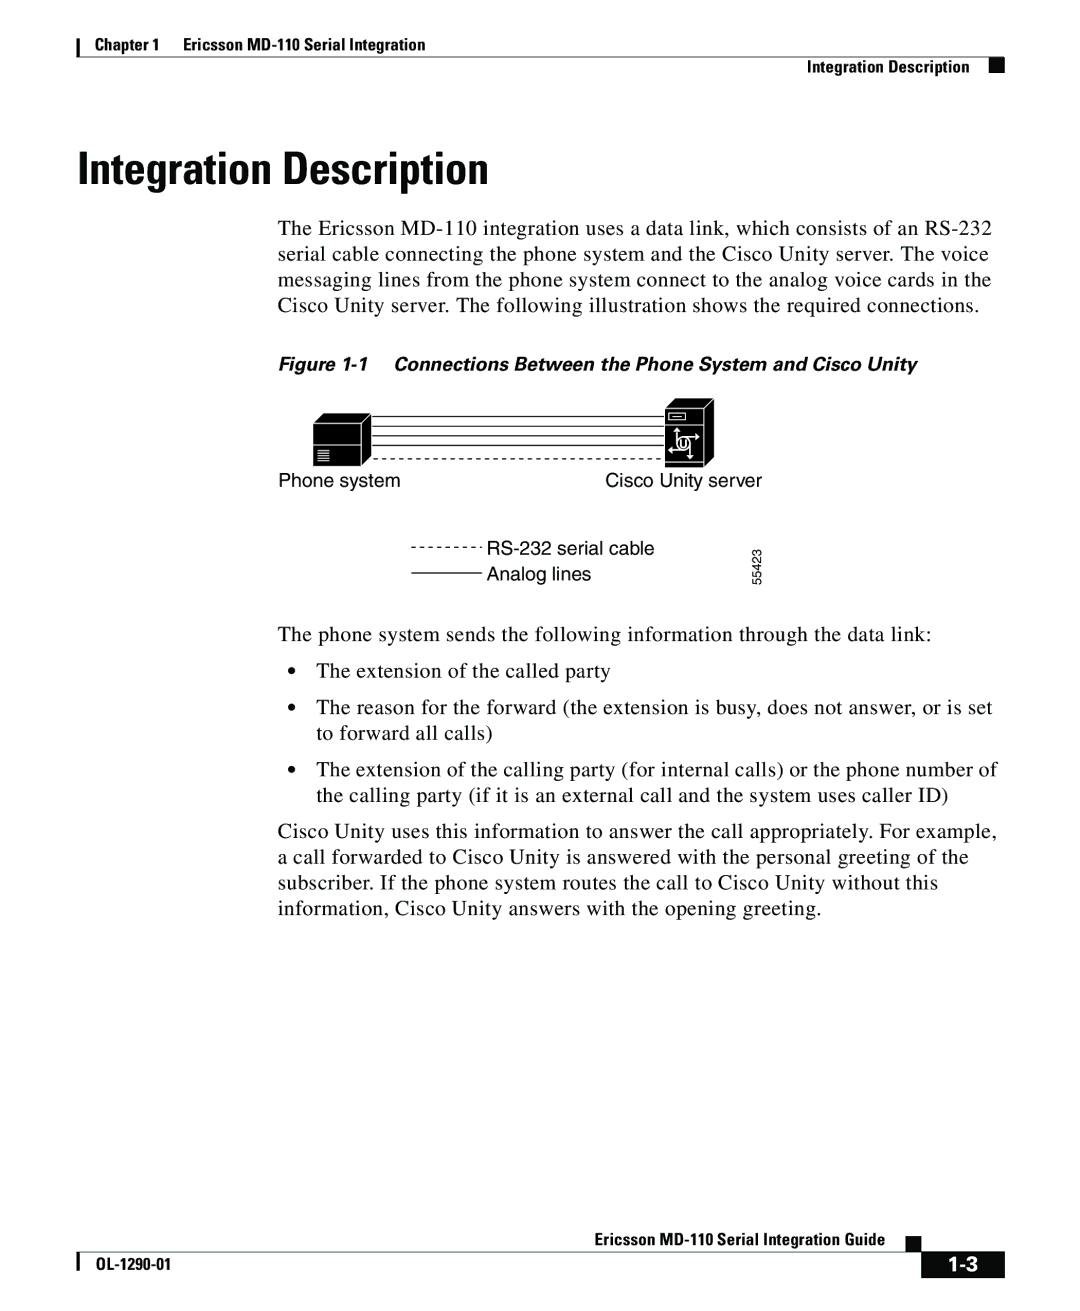 Cisco Systems MD-110 manual Integration Description, Connections Between the Phone System and Cisco Unity 